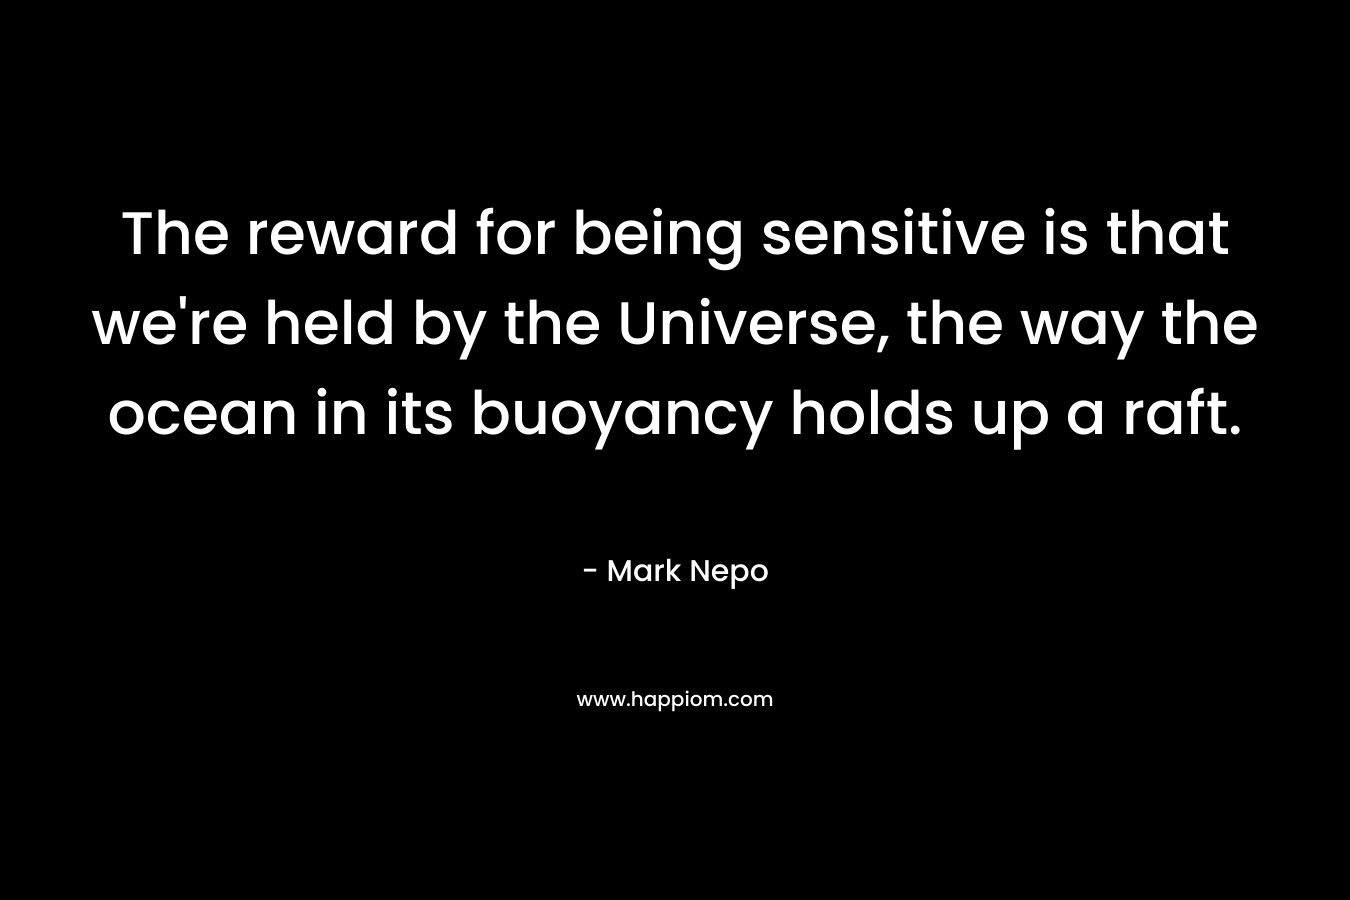 The reward for being sensitive is that we’re held by the Universe, the way the ocean in its buoyancy holds up a raft. – Mark Nepo